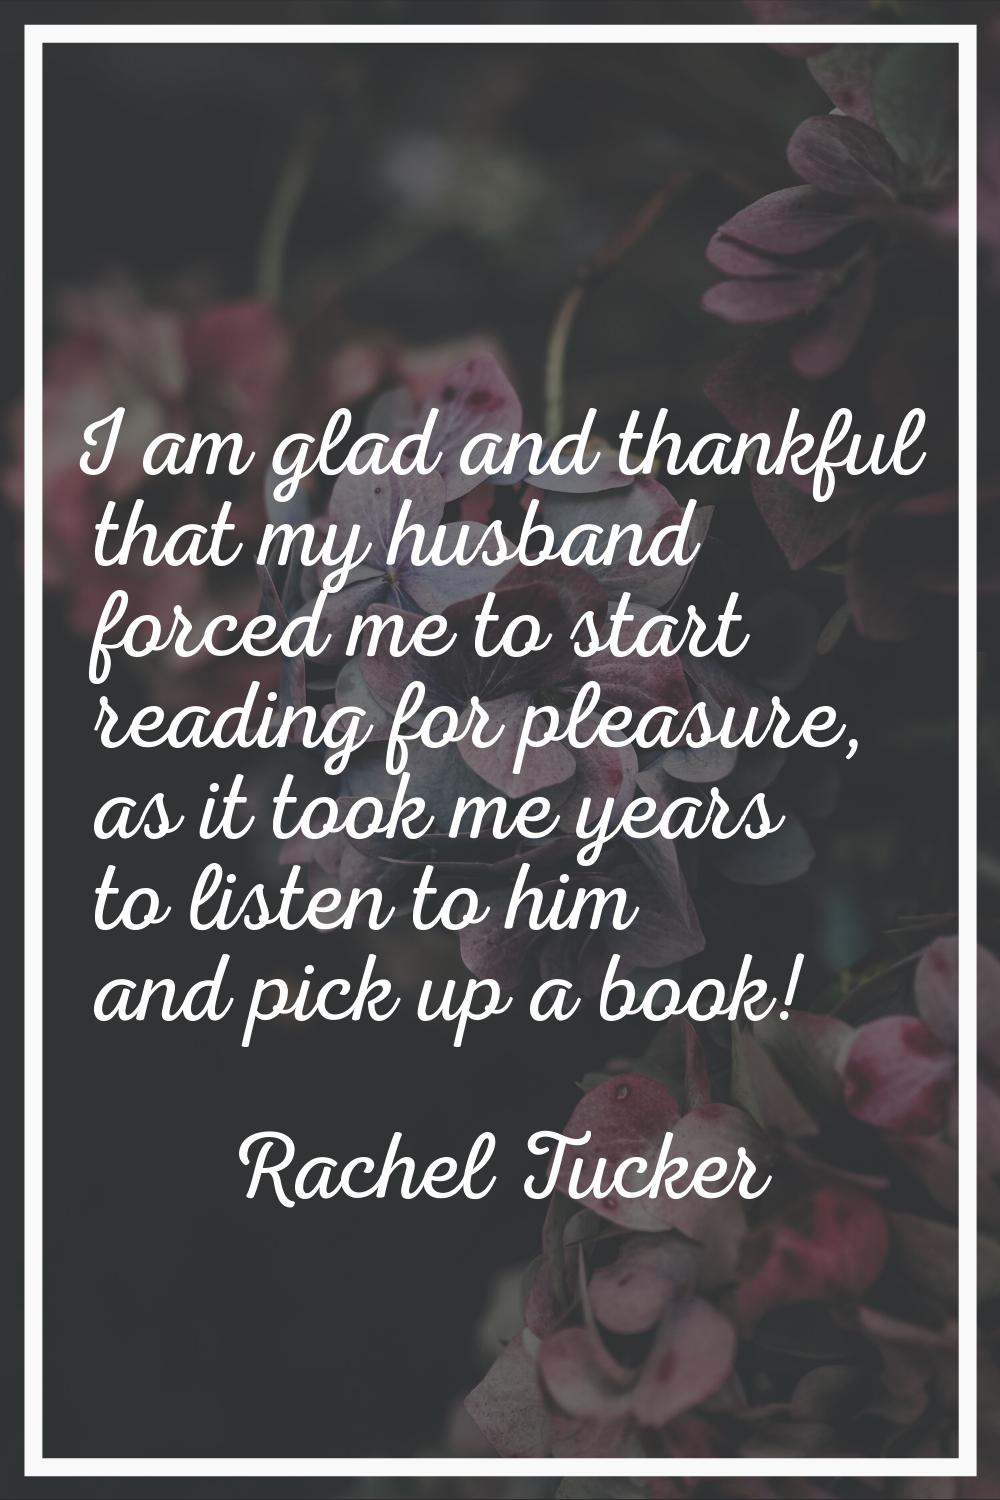 I am glad and thankful that my husband forced me to start reading for pleasure, as it took me years